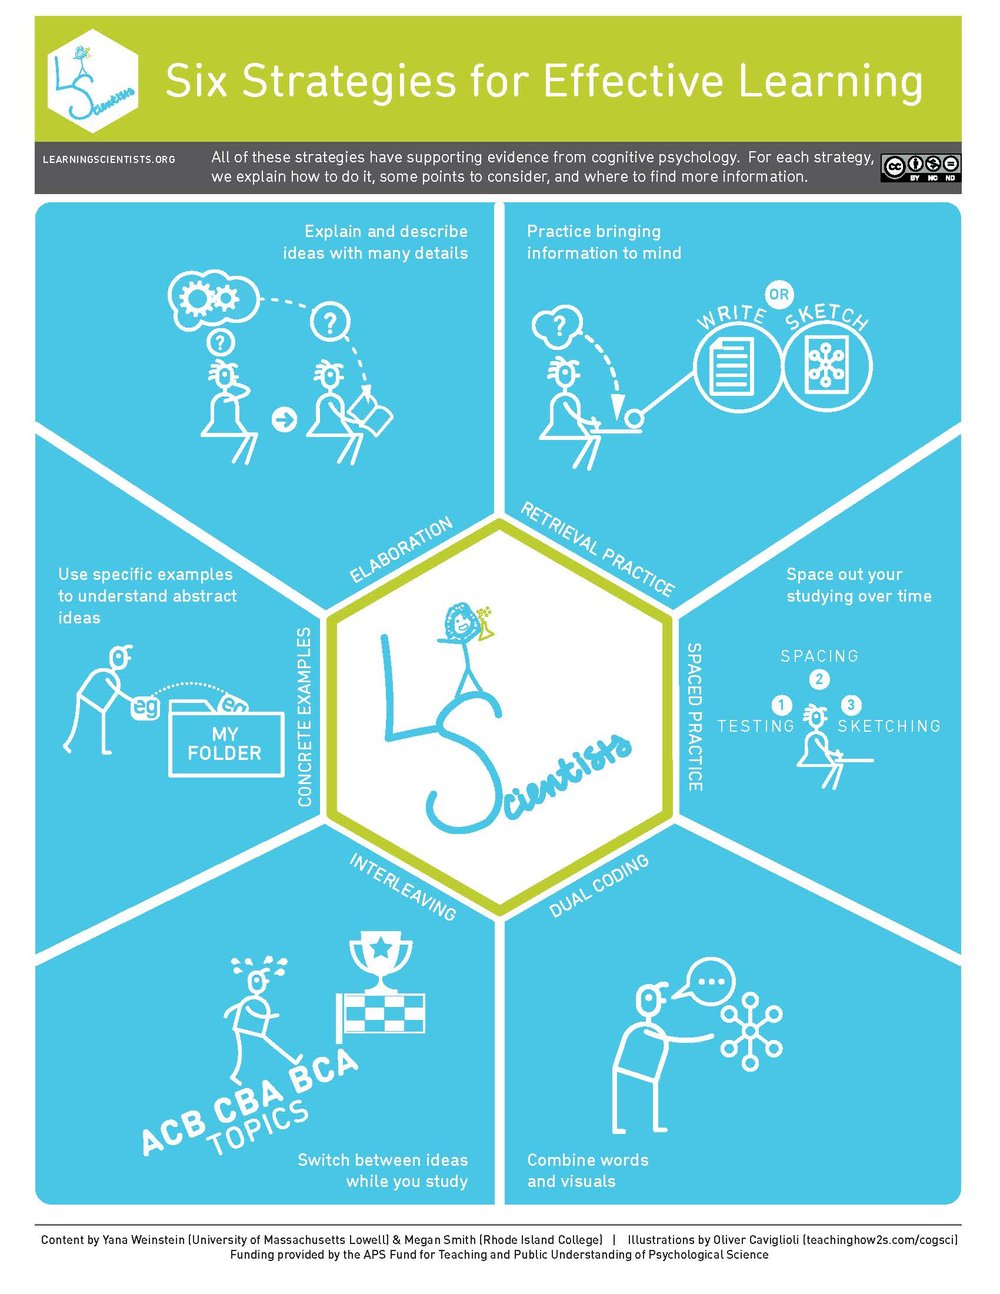 Six Strategies for Effective Learning (infographic)